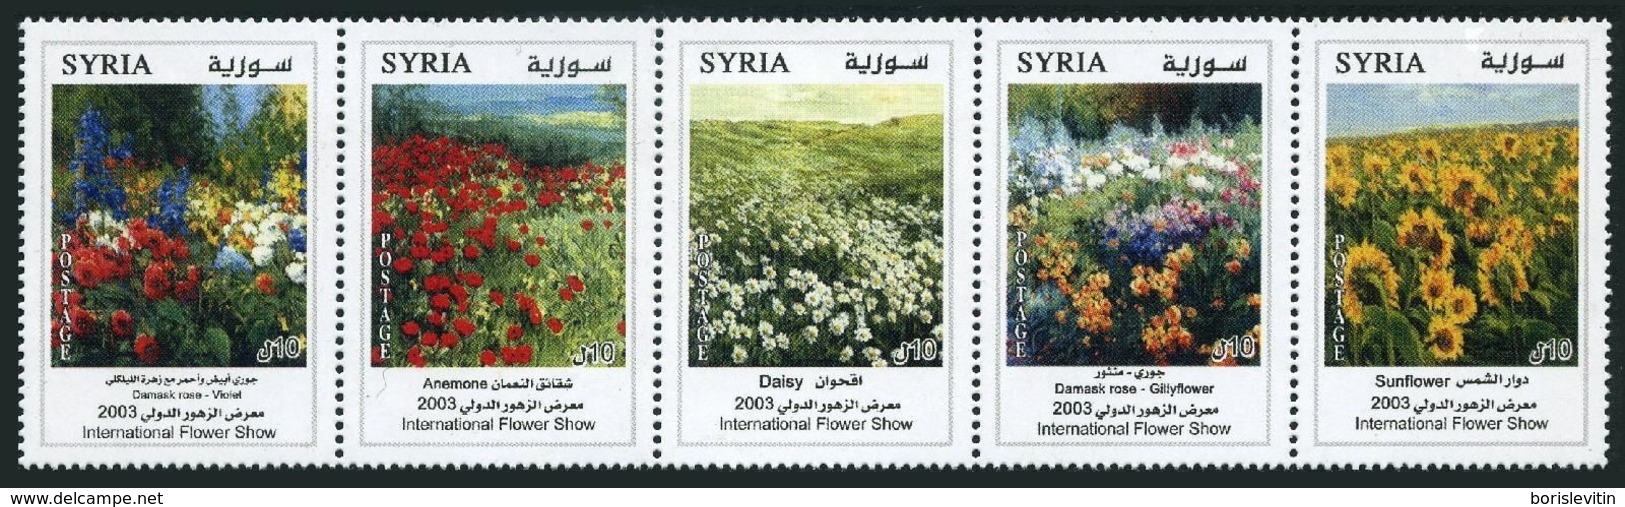 Syria 1524 Ae Strip,MNH. Flower Show,2003.Roses And Violets,Anemones,Daisies, - Roses